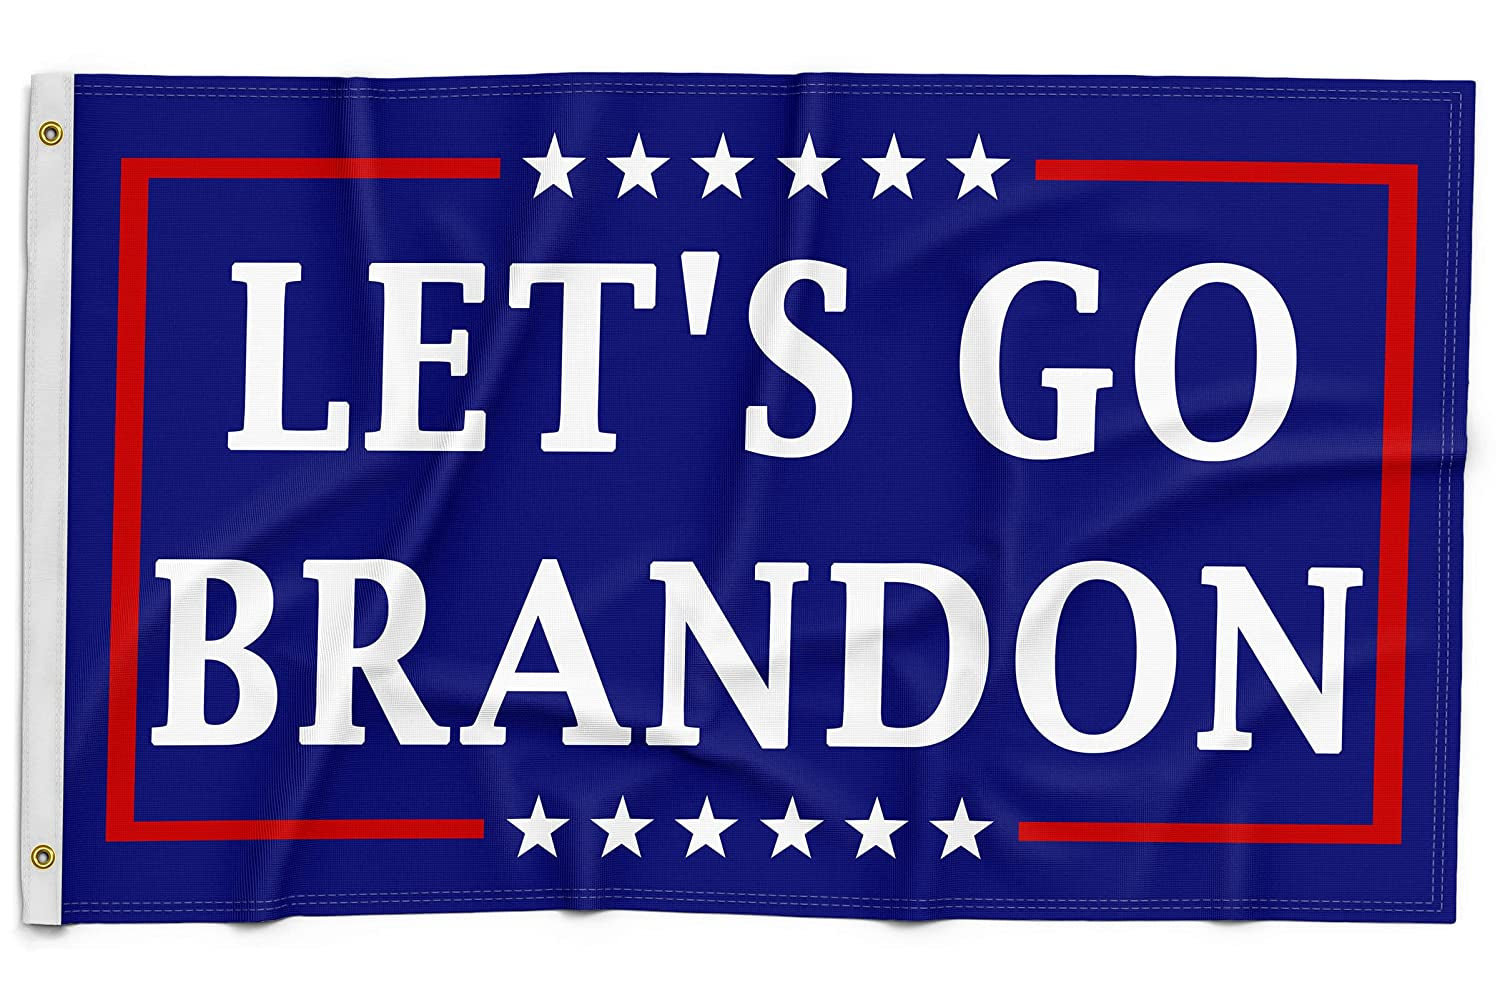 Waketree, Lets Go Brandon 2X3 FT Flag Indoor Outdoor Double Stitched Polyester Flag with 2 Grommets